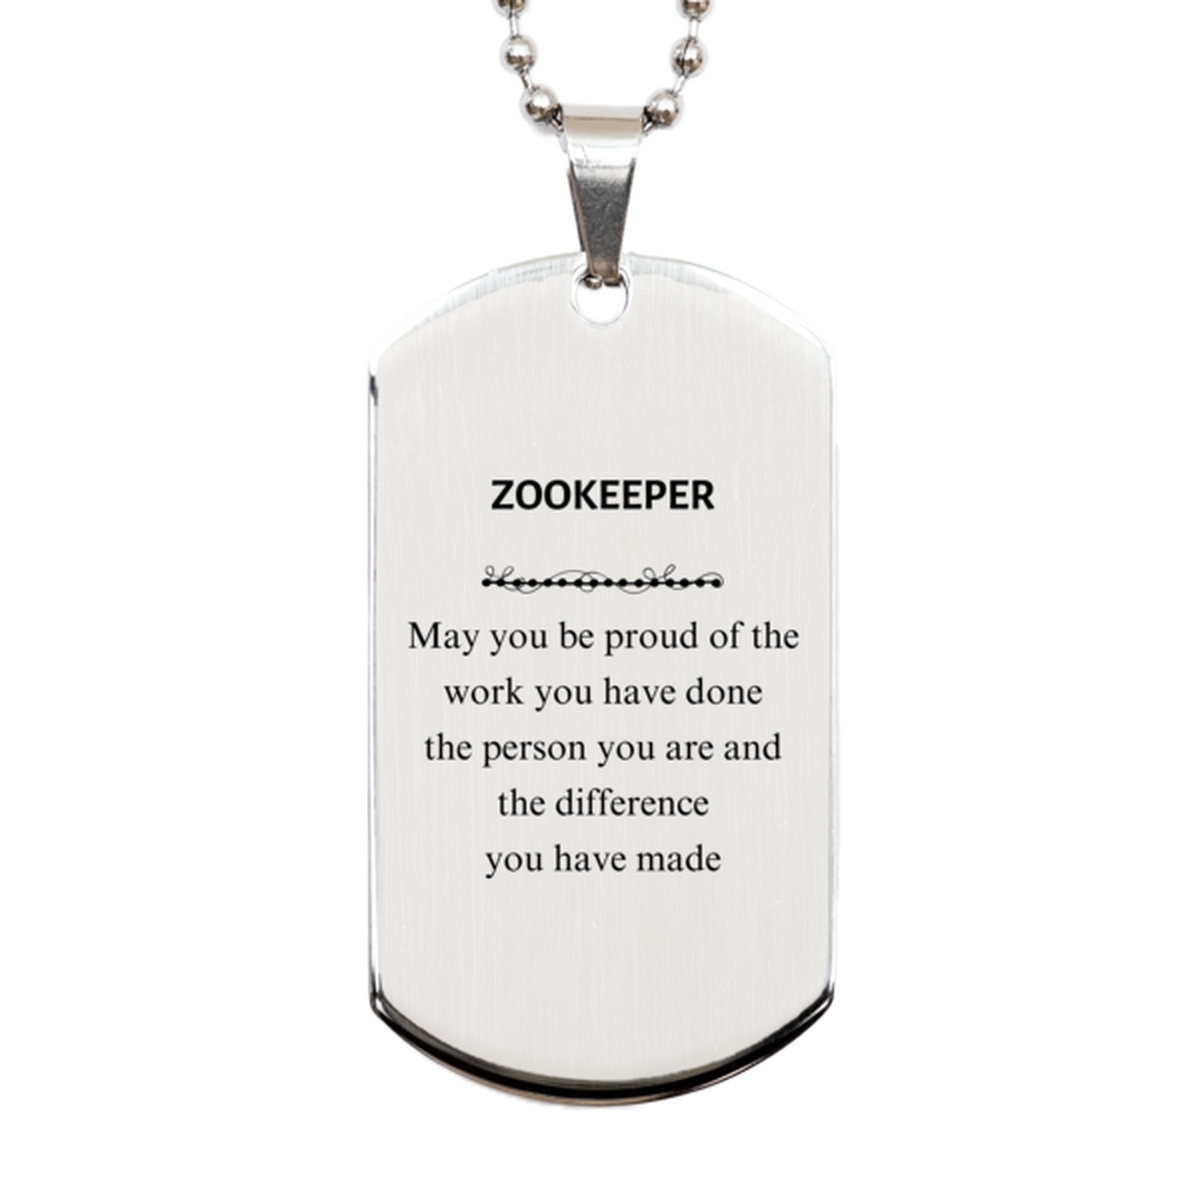 Zookeeper May you be proud of the work you have done, Retirement Zookeeper Silver Dog Tag for Colleague Appreciation Gifts Amazing for Zookeeper